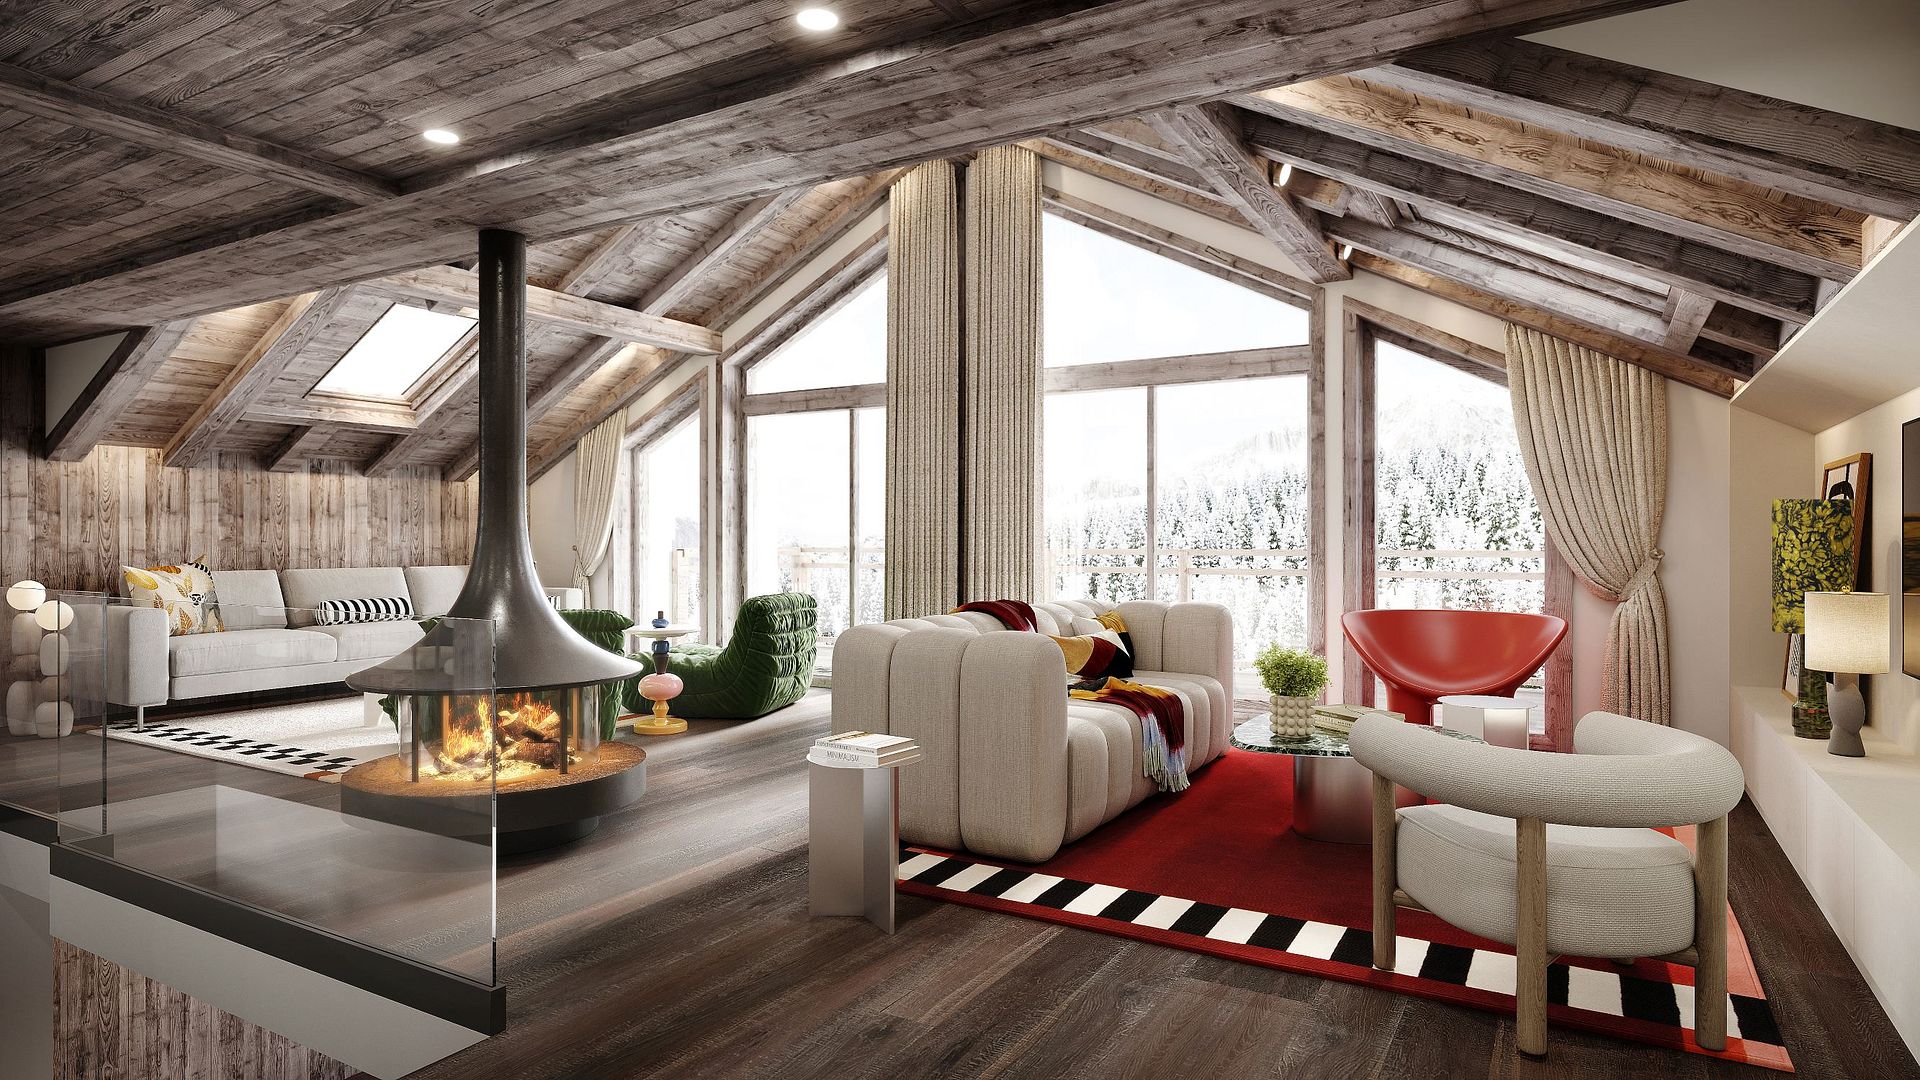 6 bed Chalet For Sale in Three Valleys, French Alps